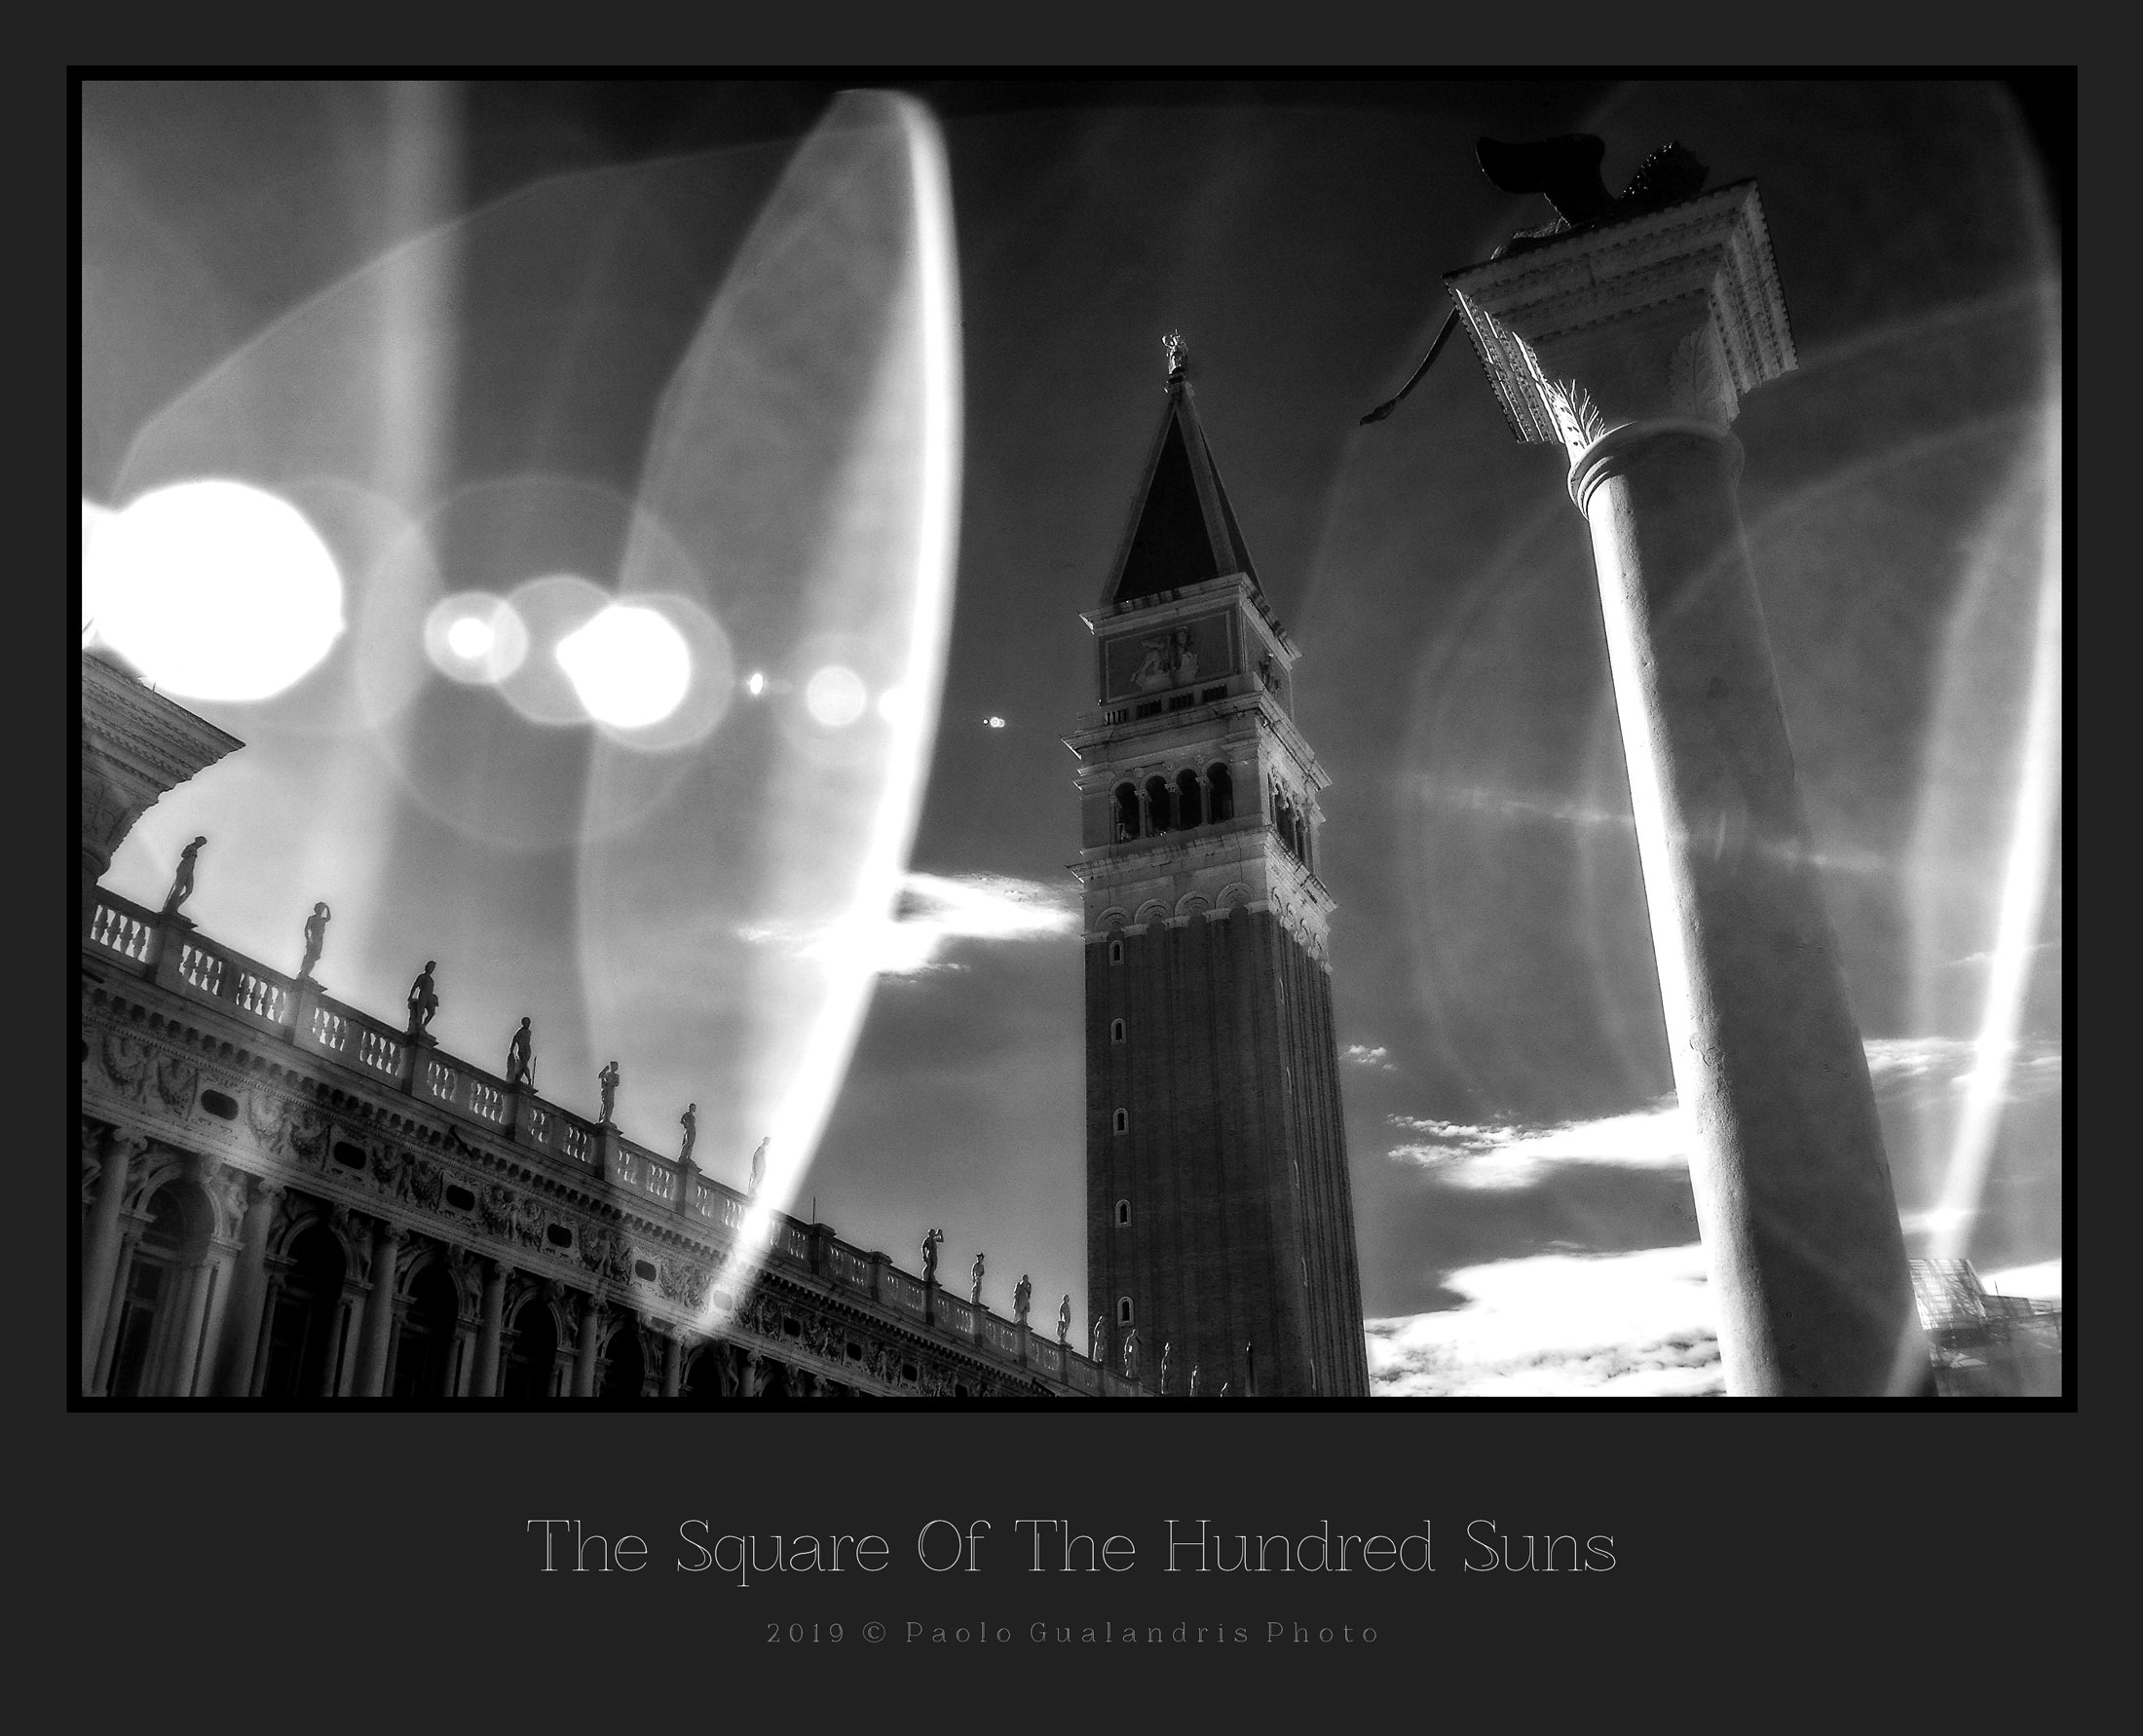 The Square Of The Hundred Suns...